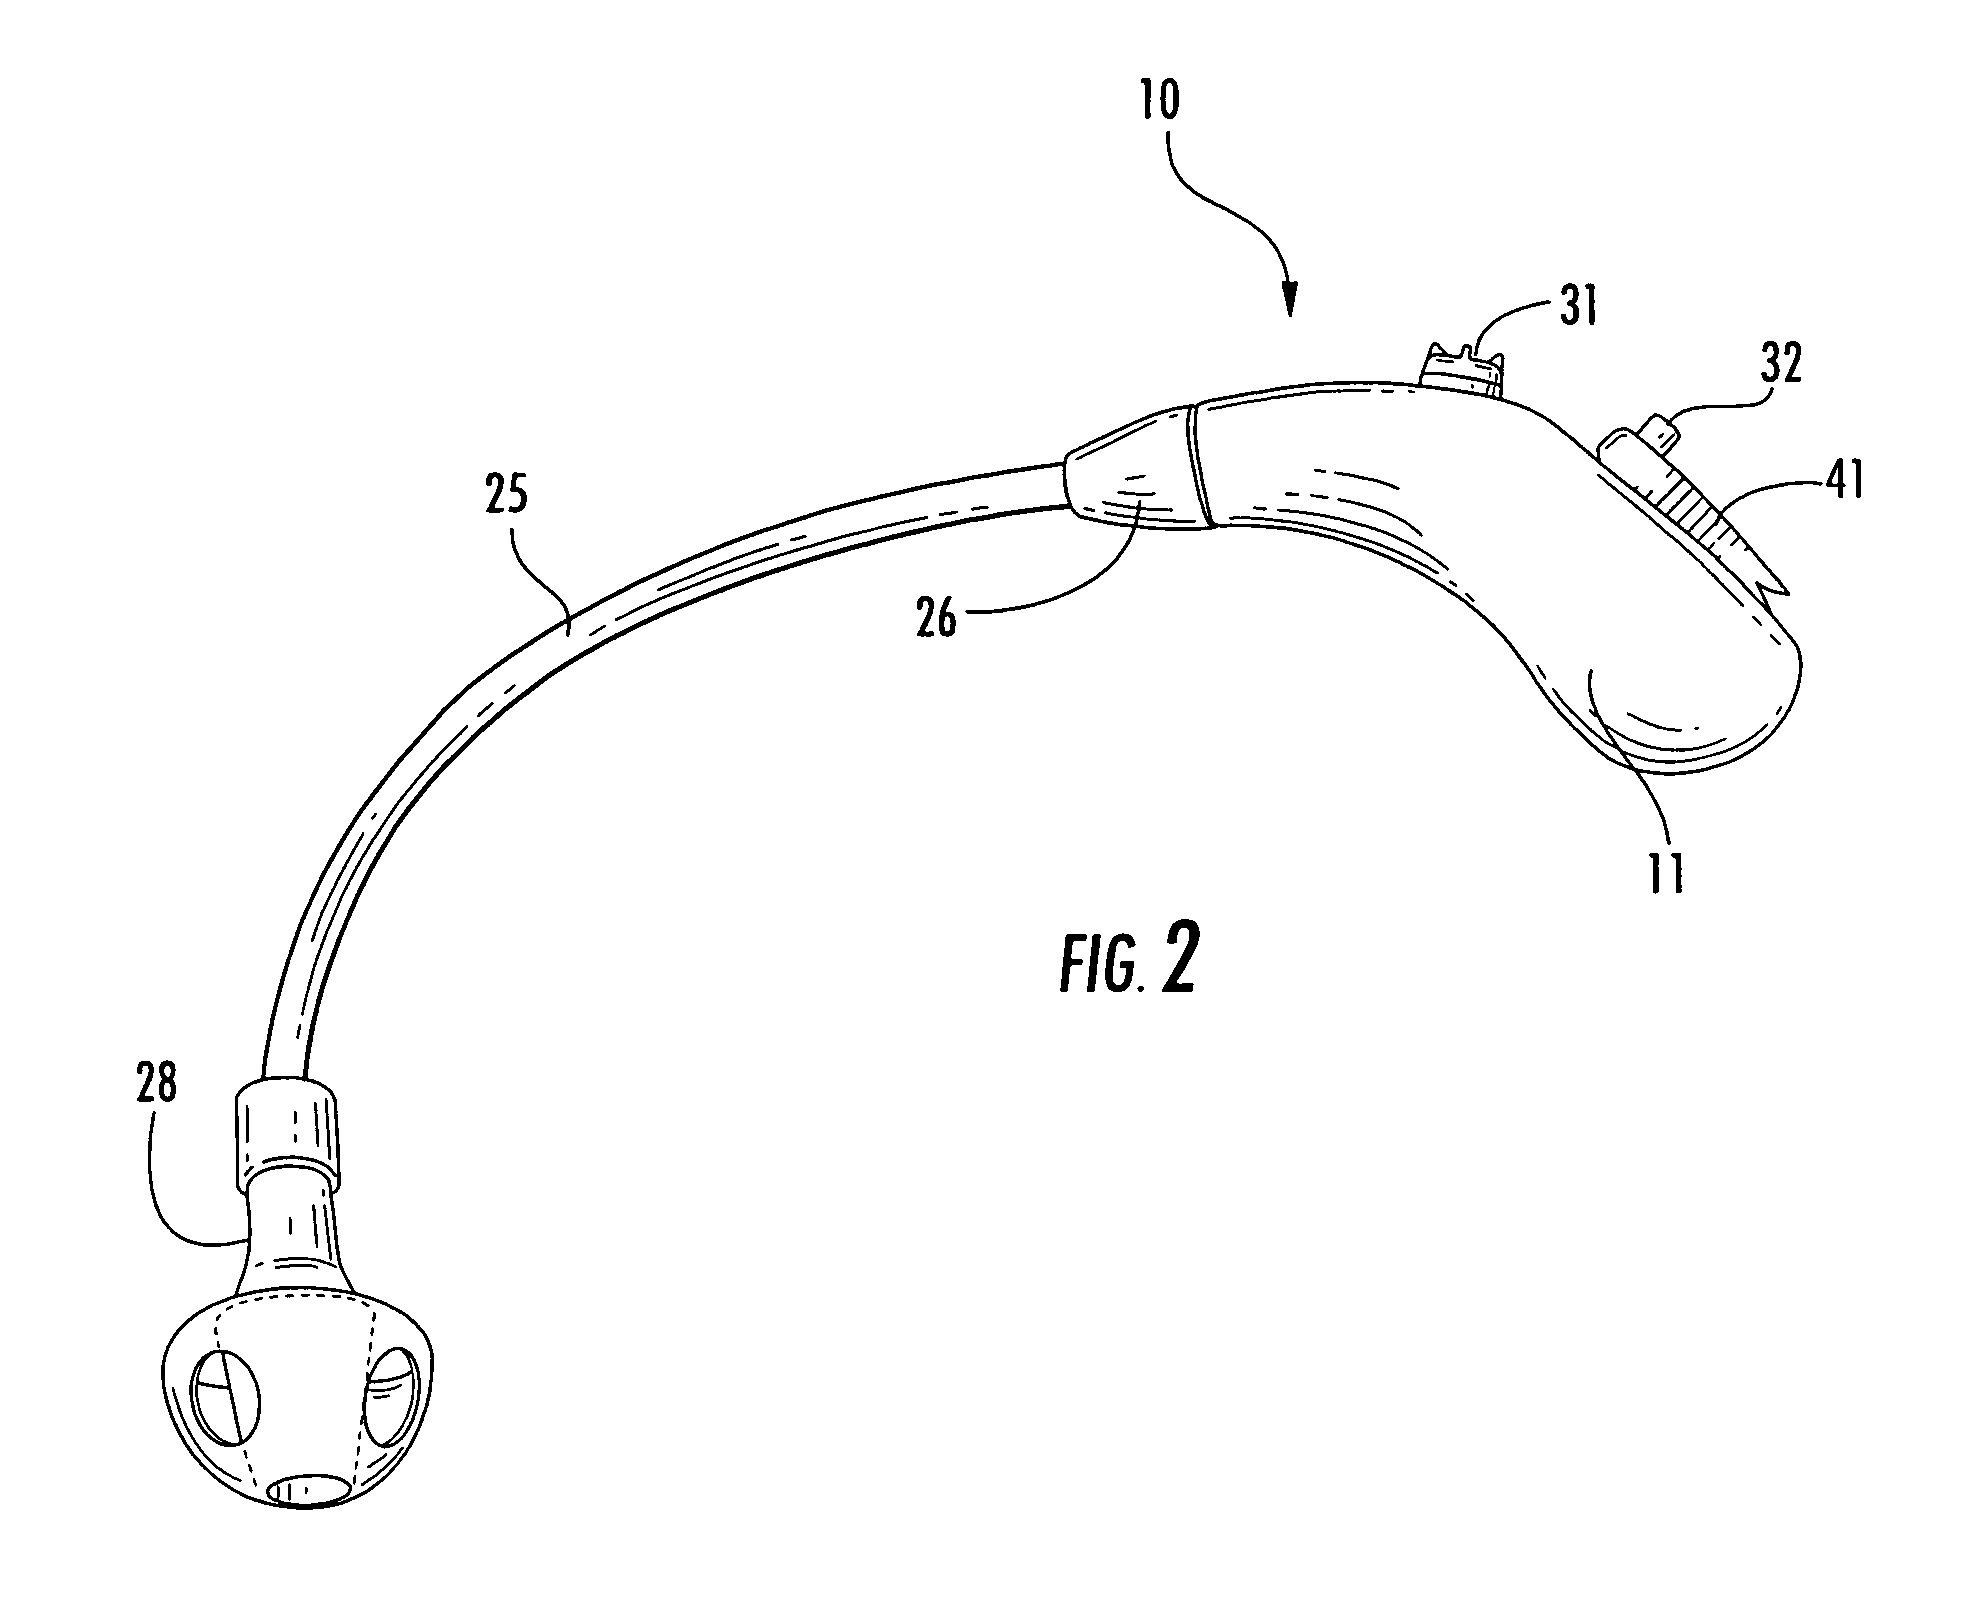 Behind-the-ear hearing aid with integrally-molded instrument case